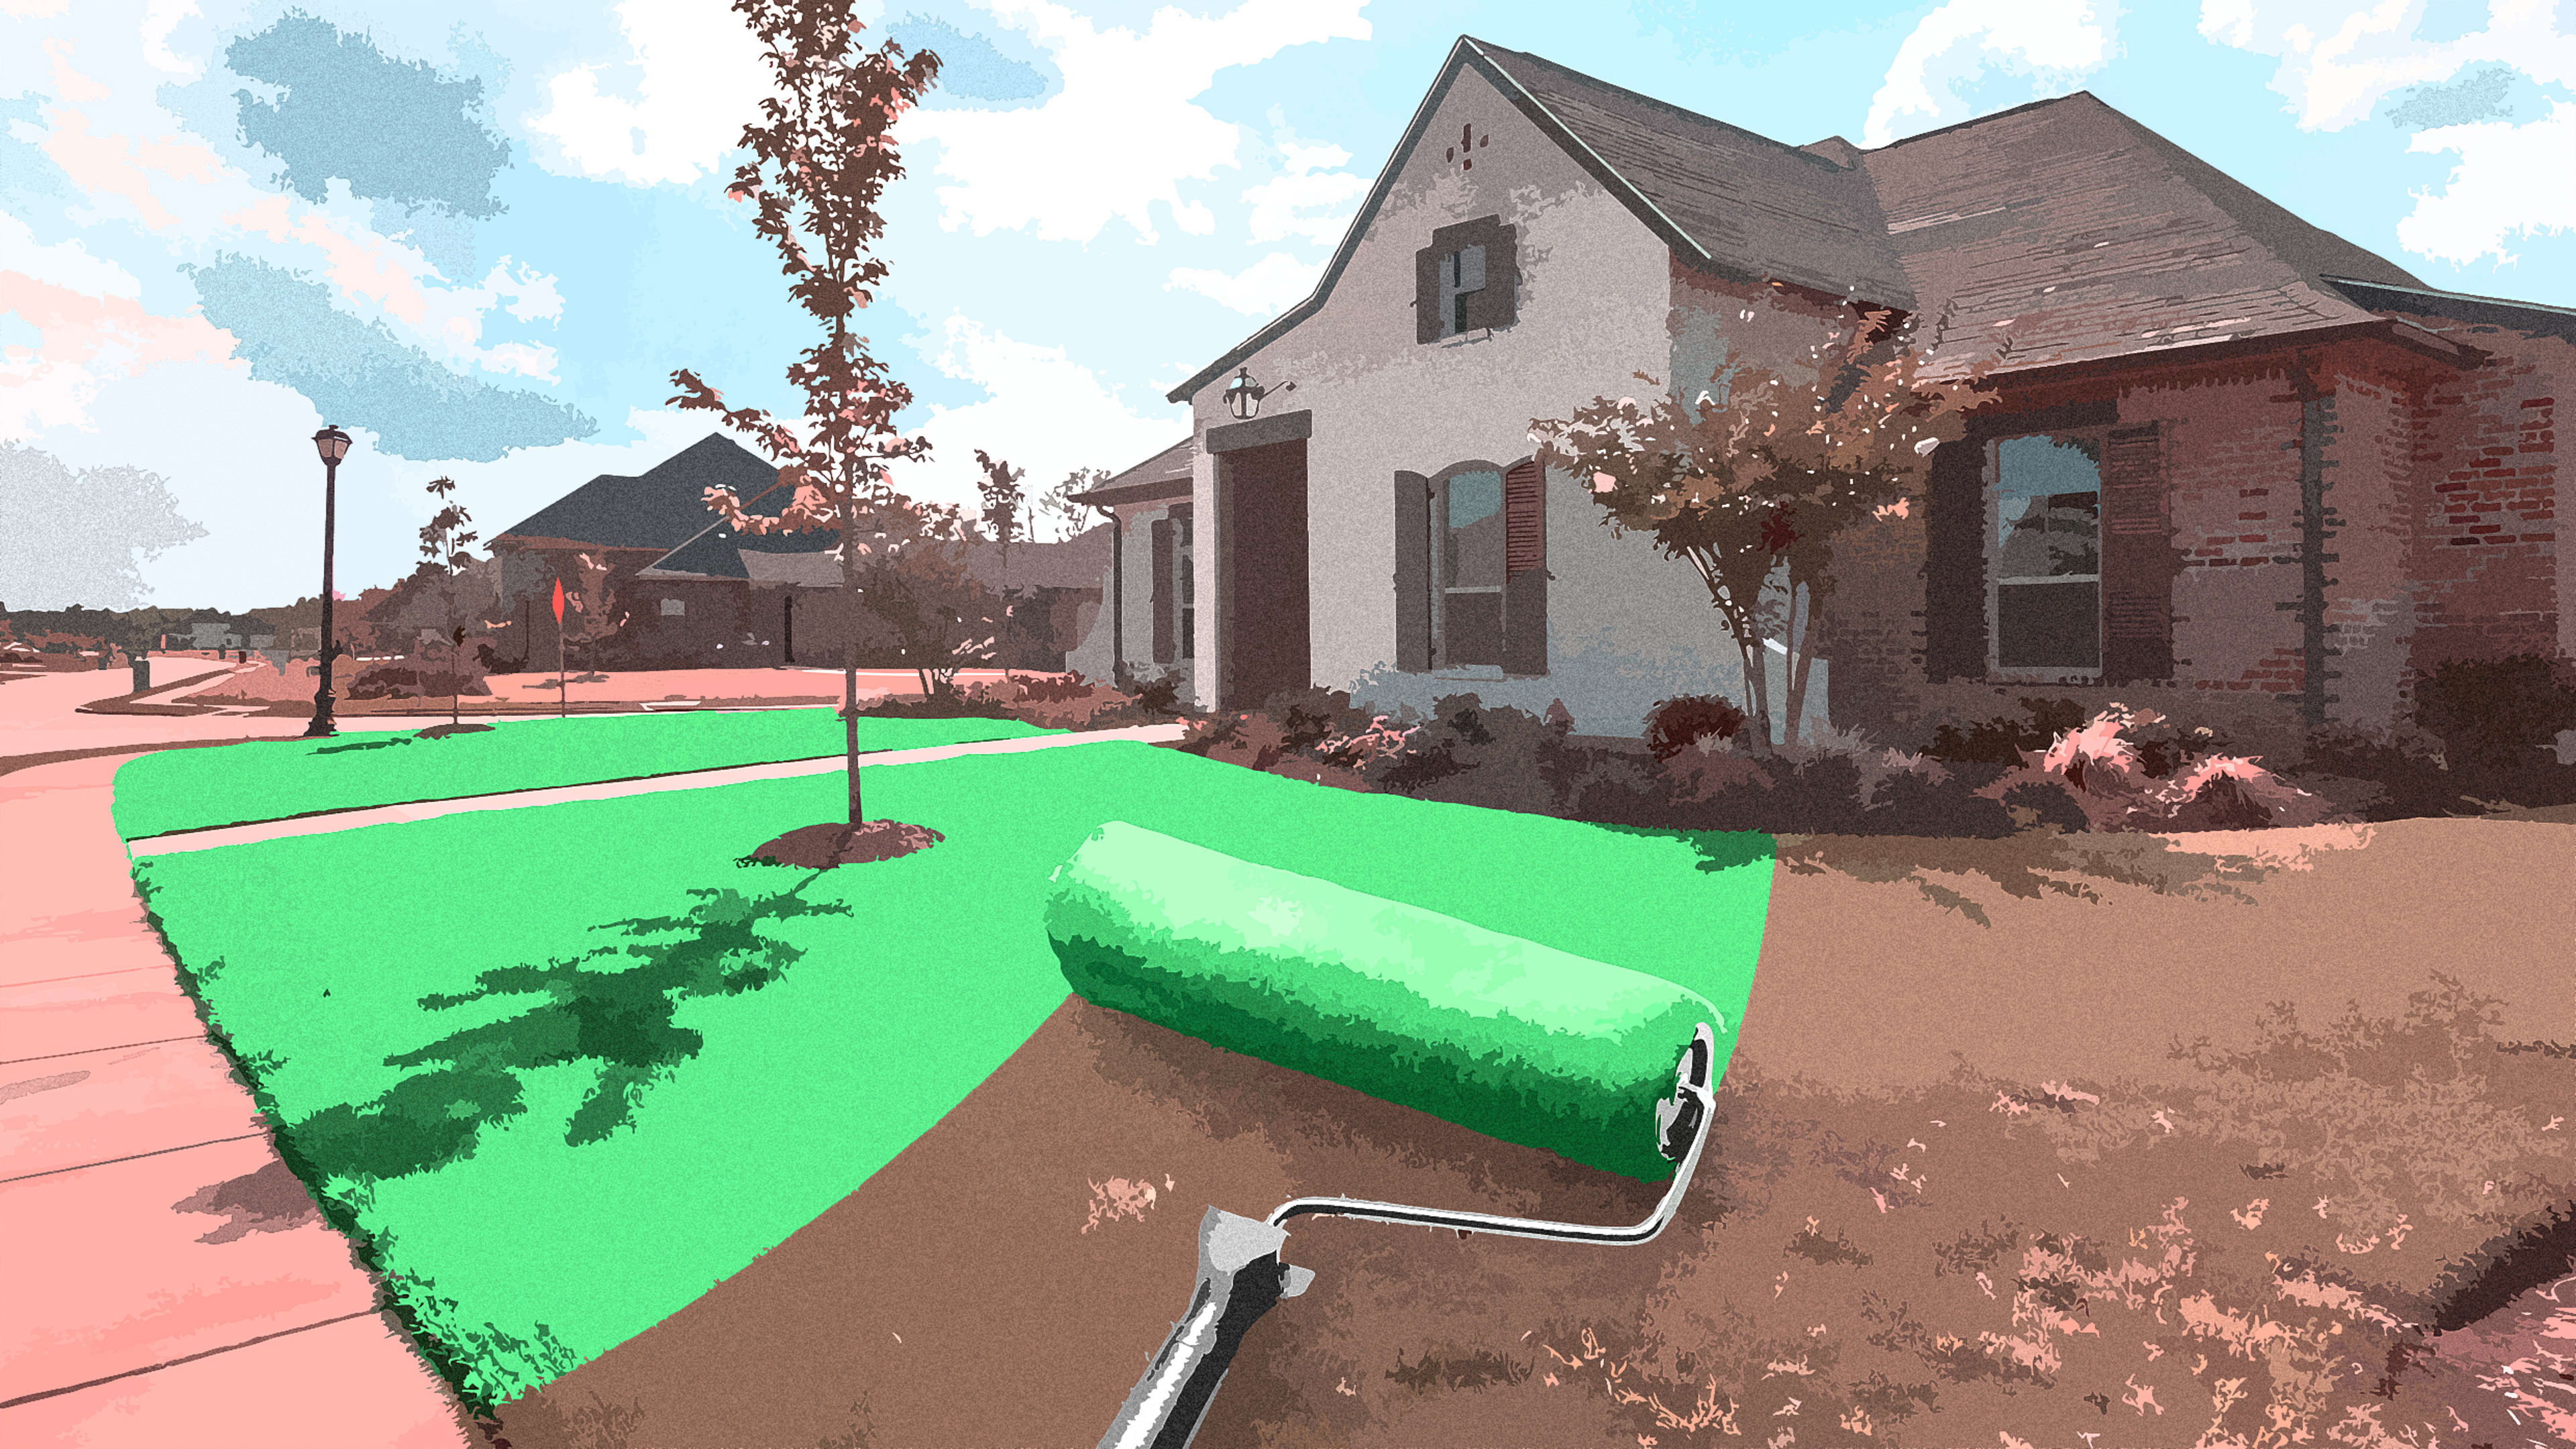 Your neighbor’s picture perfect lawn might actually be painted grass